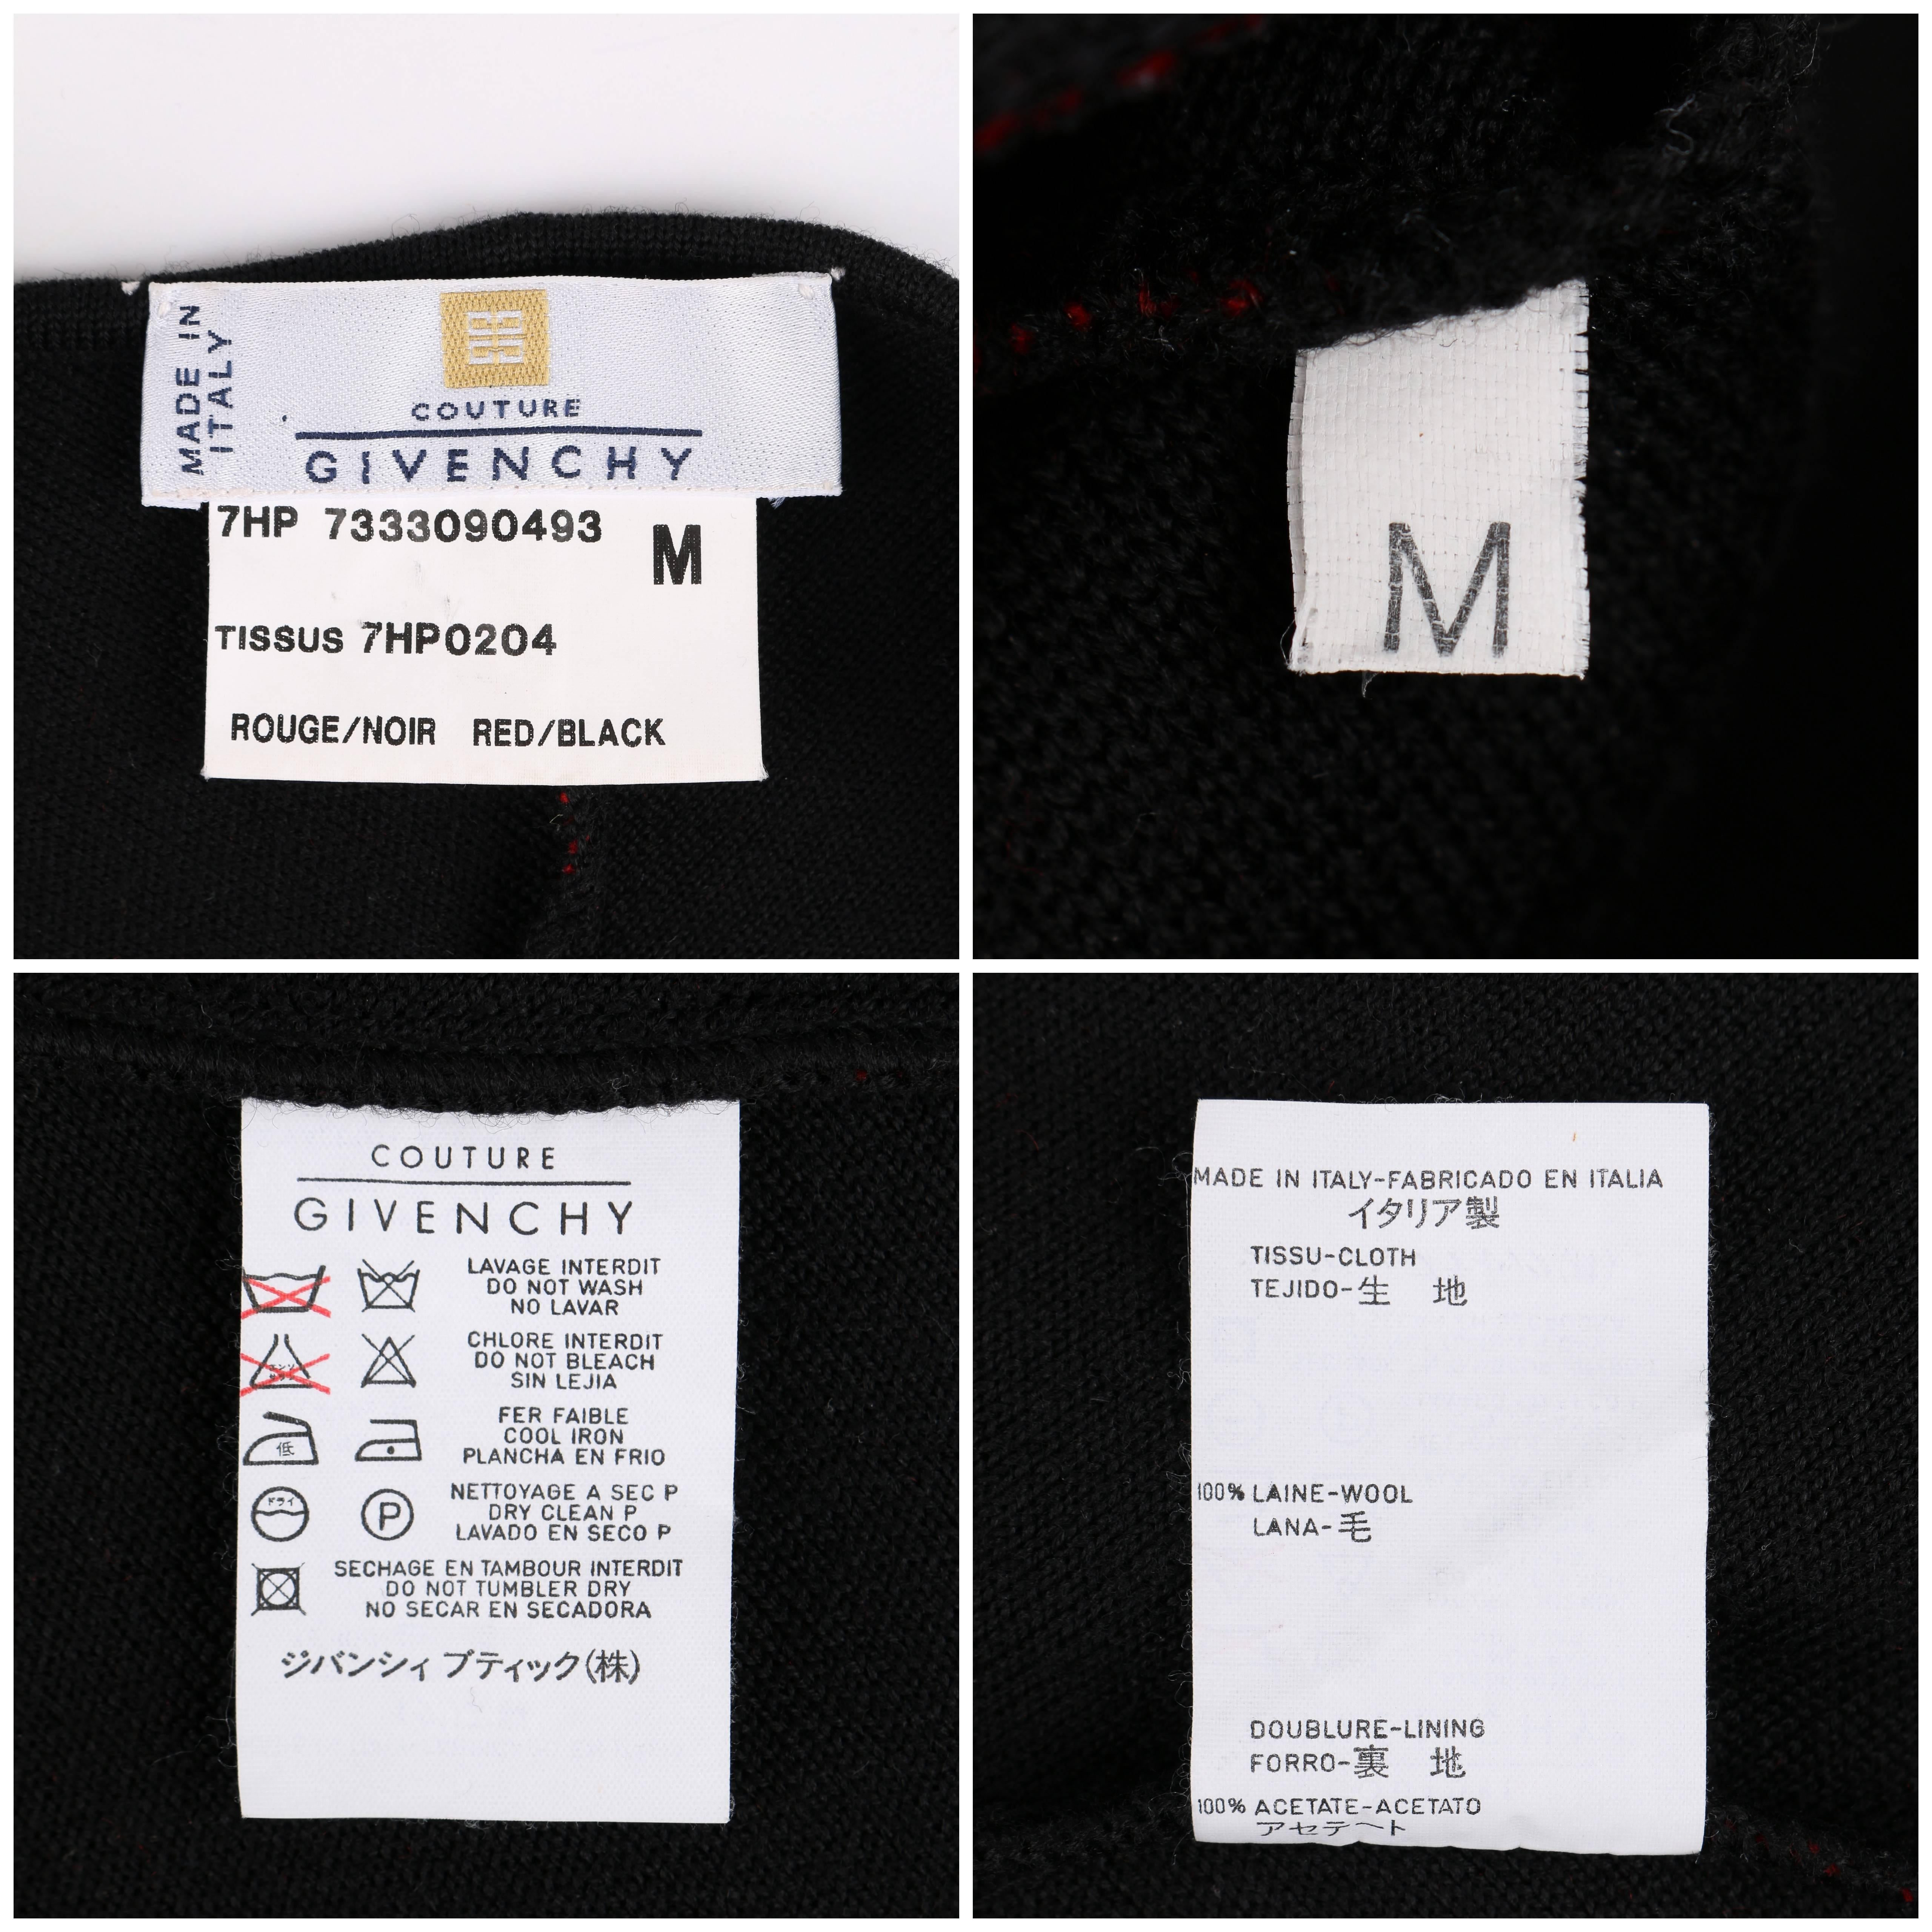 GIVENCHY COUTURE A/W 1998 ALEXANDER McQUEEN Black Red Stripe Wool Knit ...